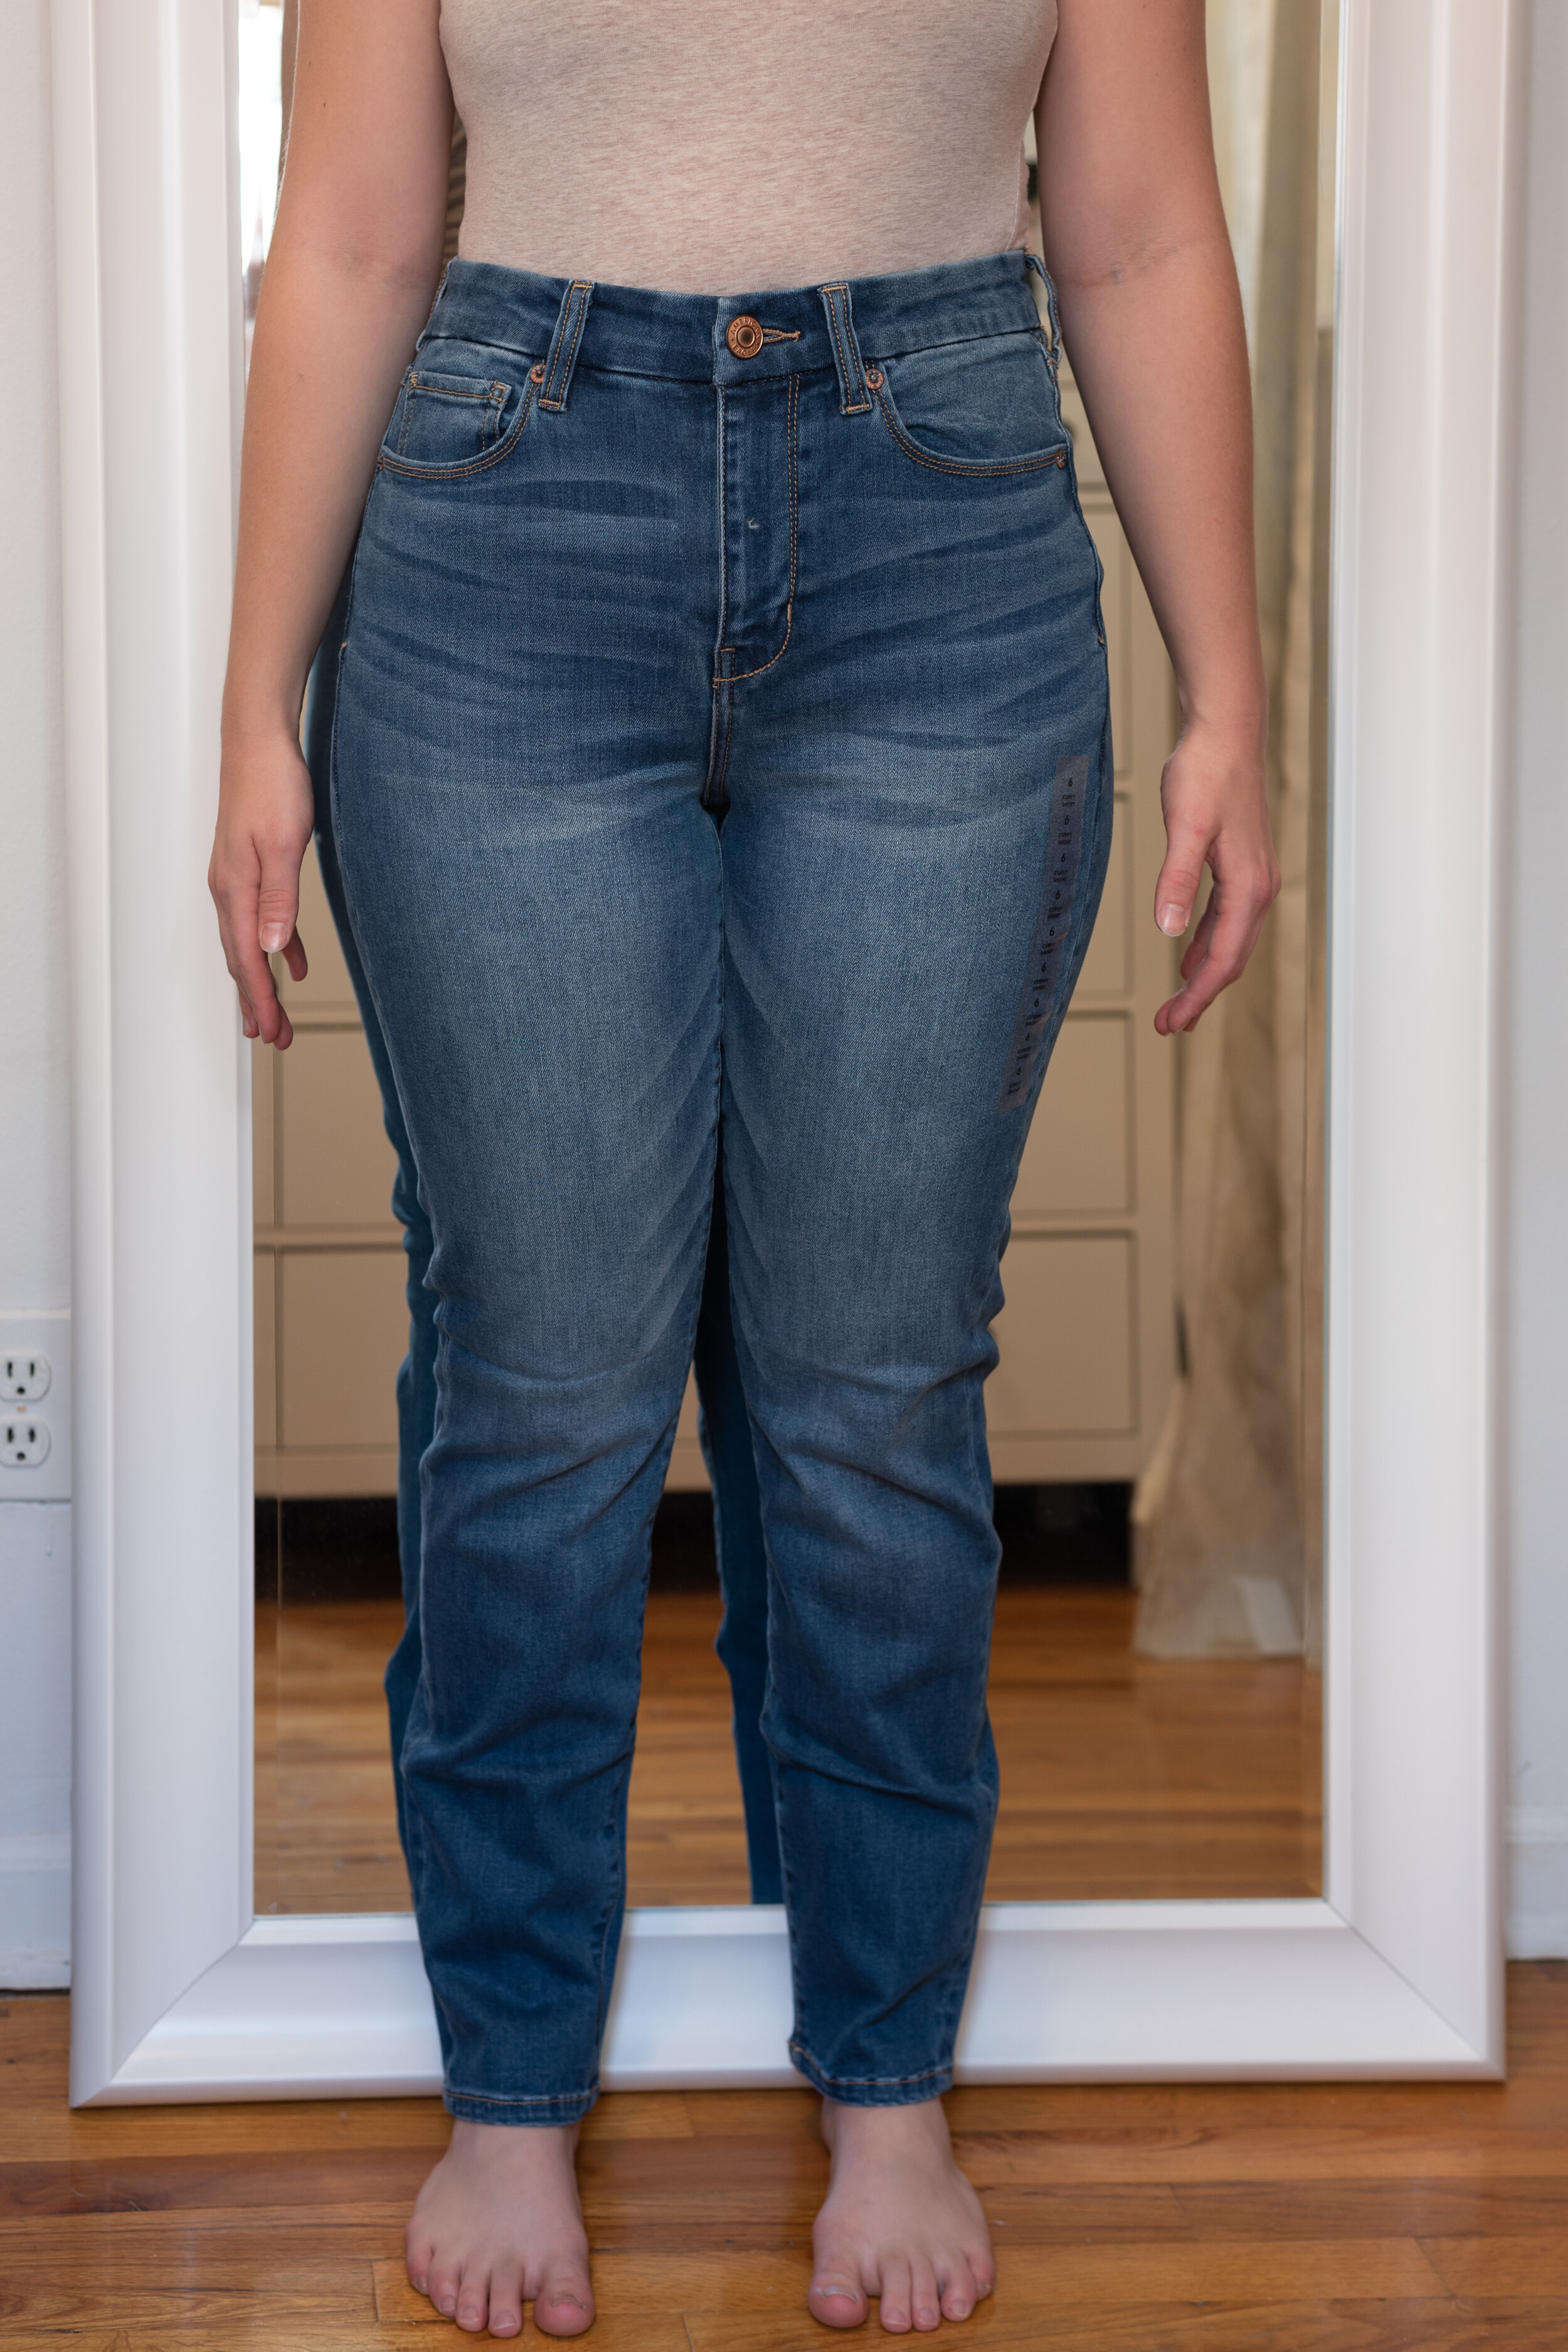 my fit jeans reviews